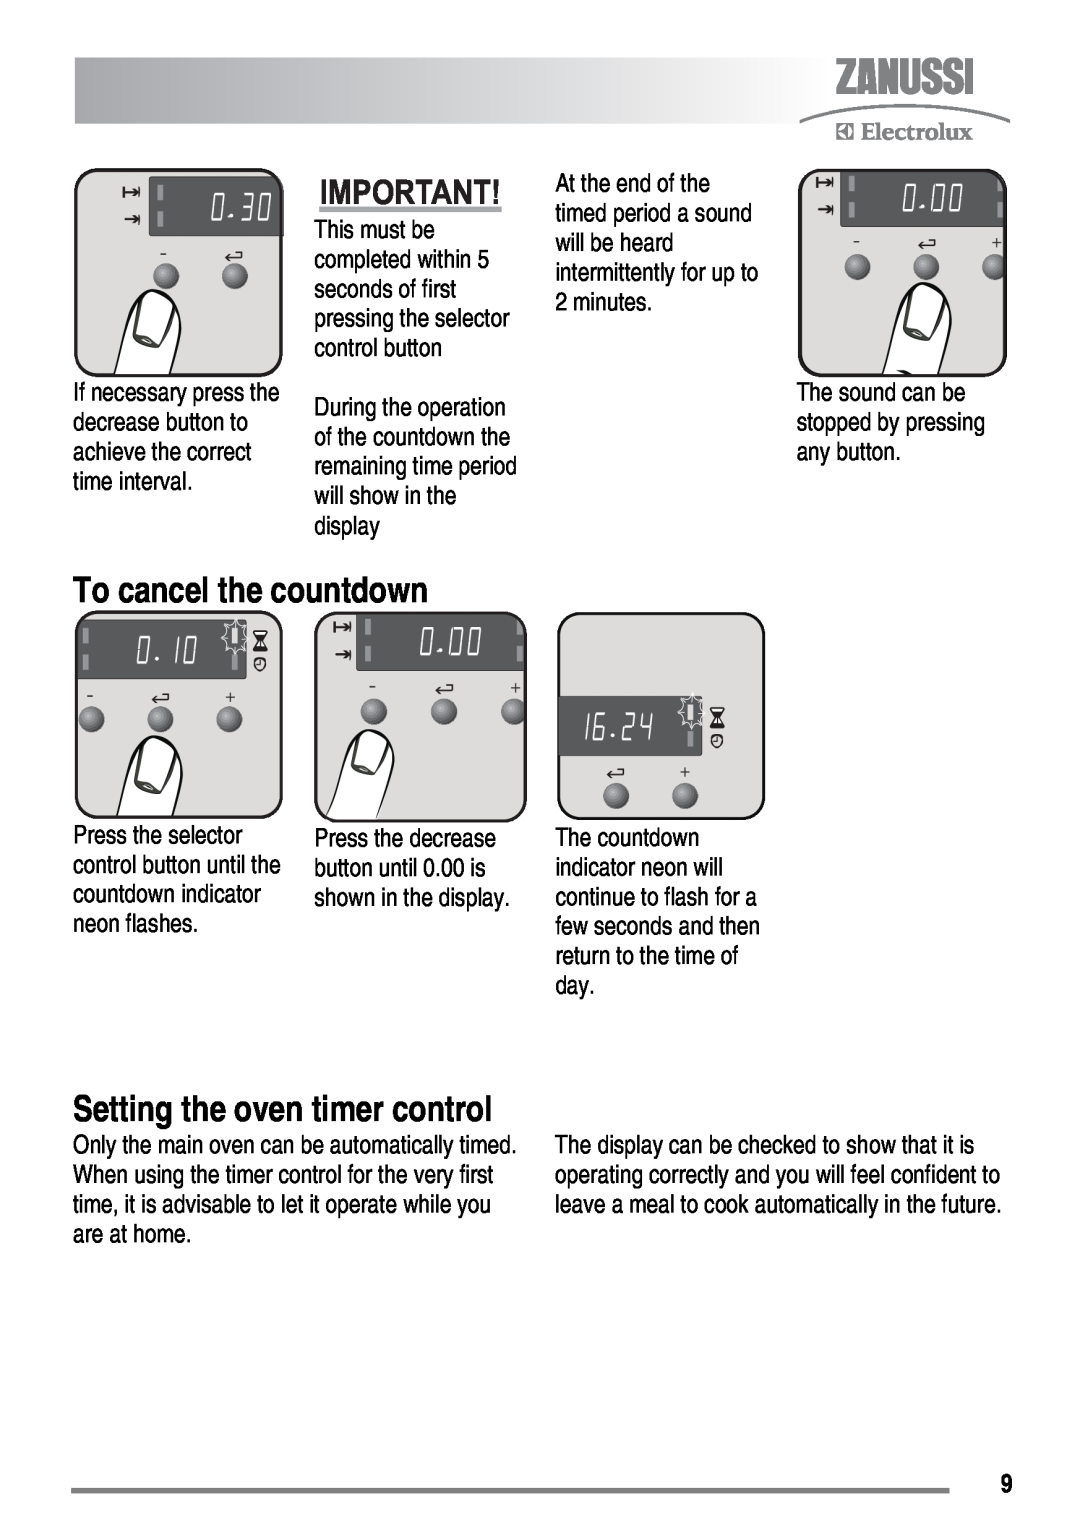 Zanussi ZKM6040 user manual To cancel the countdown, Setting the oven timer control 